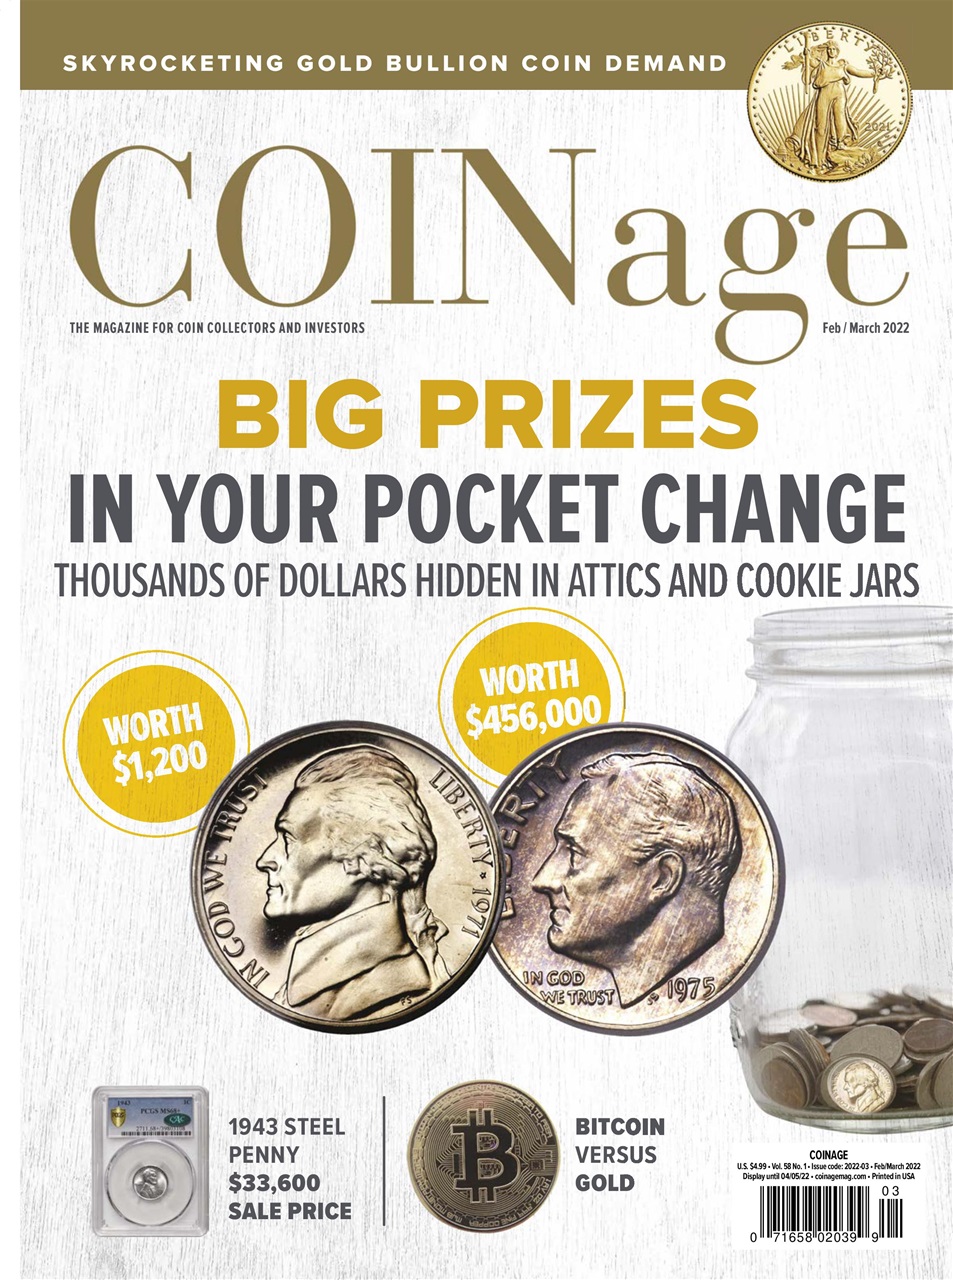 Subscribe to Coinage Magazine